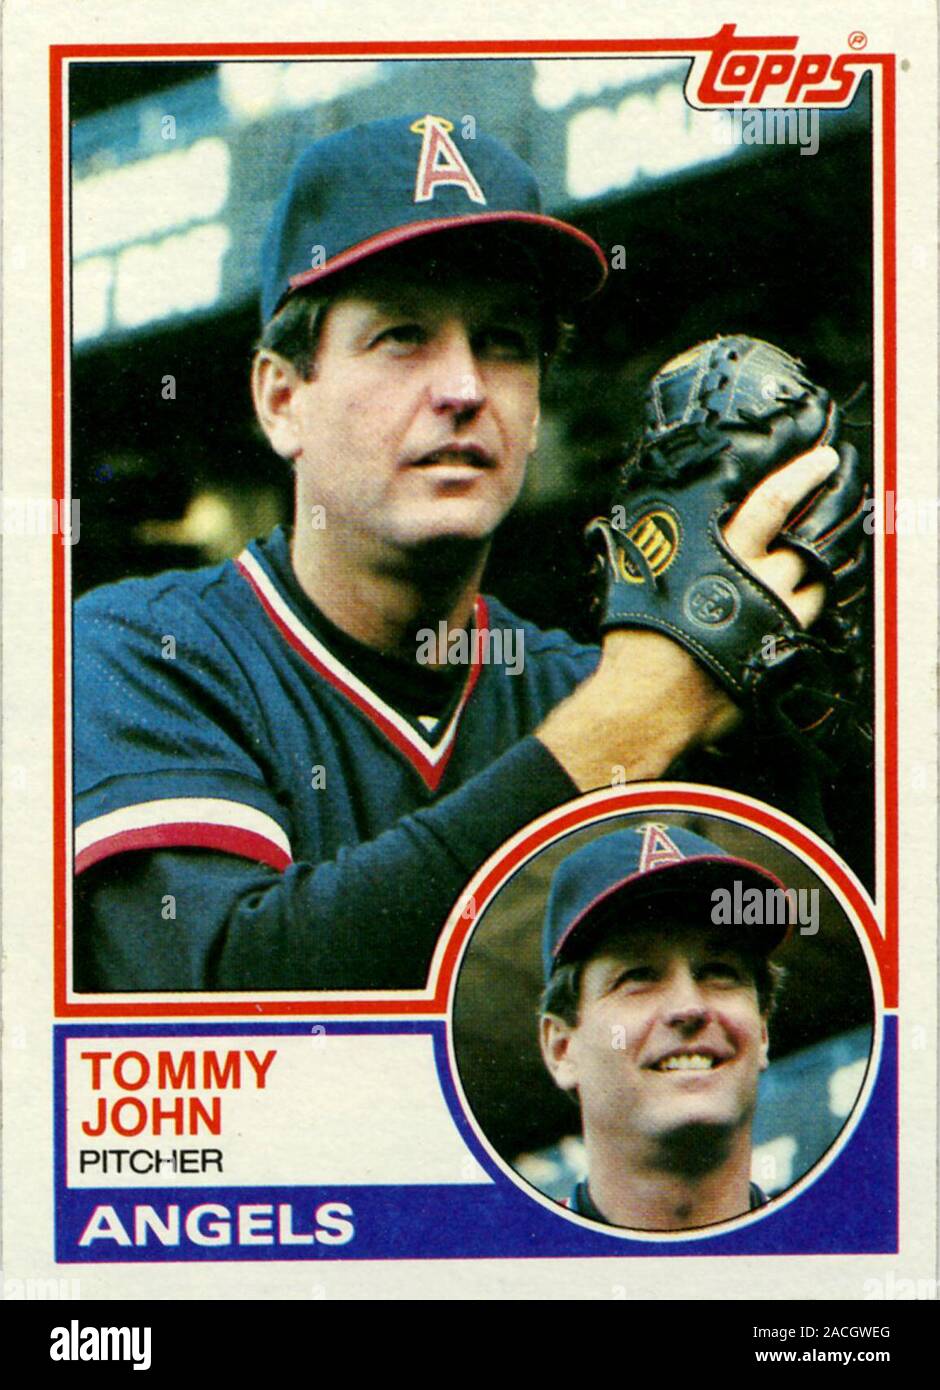 Topps baseball card depicting Tommy John with the California Angels in ...